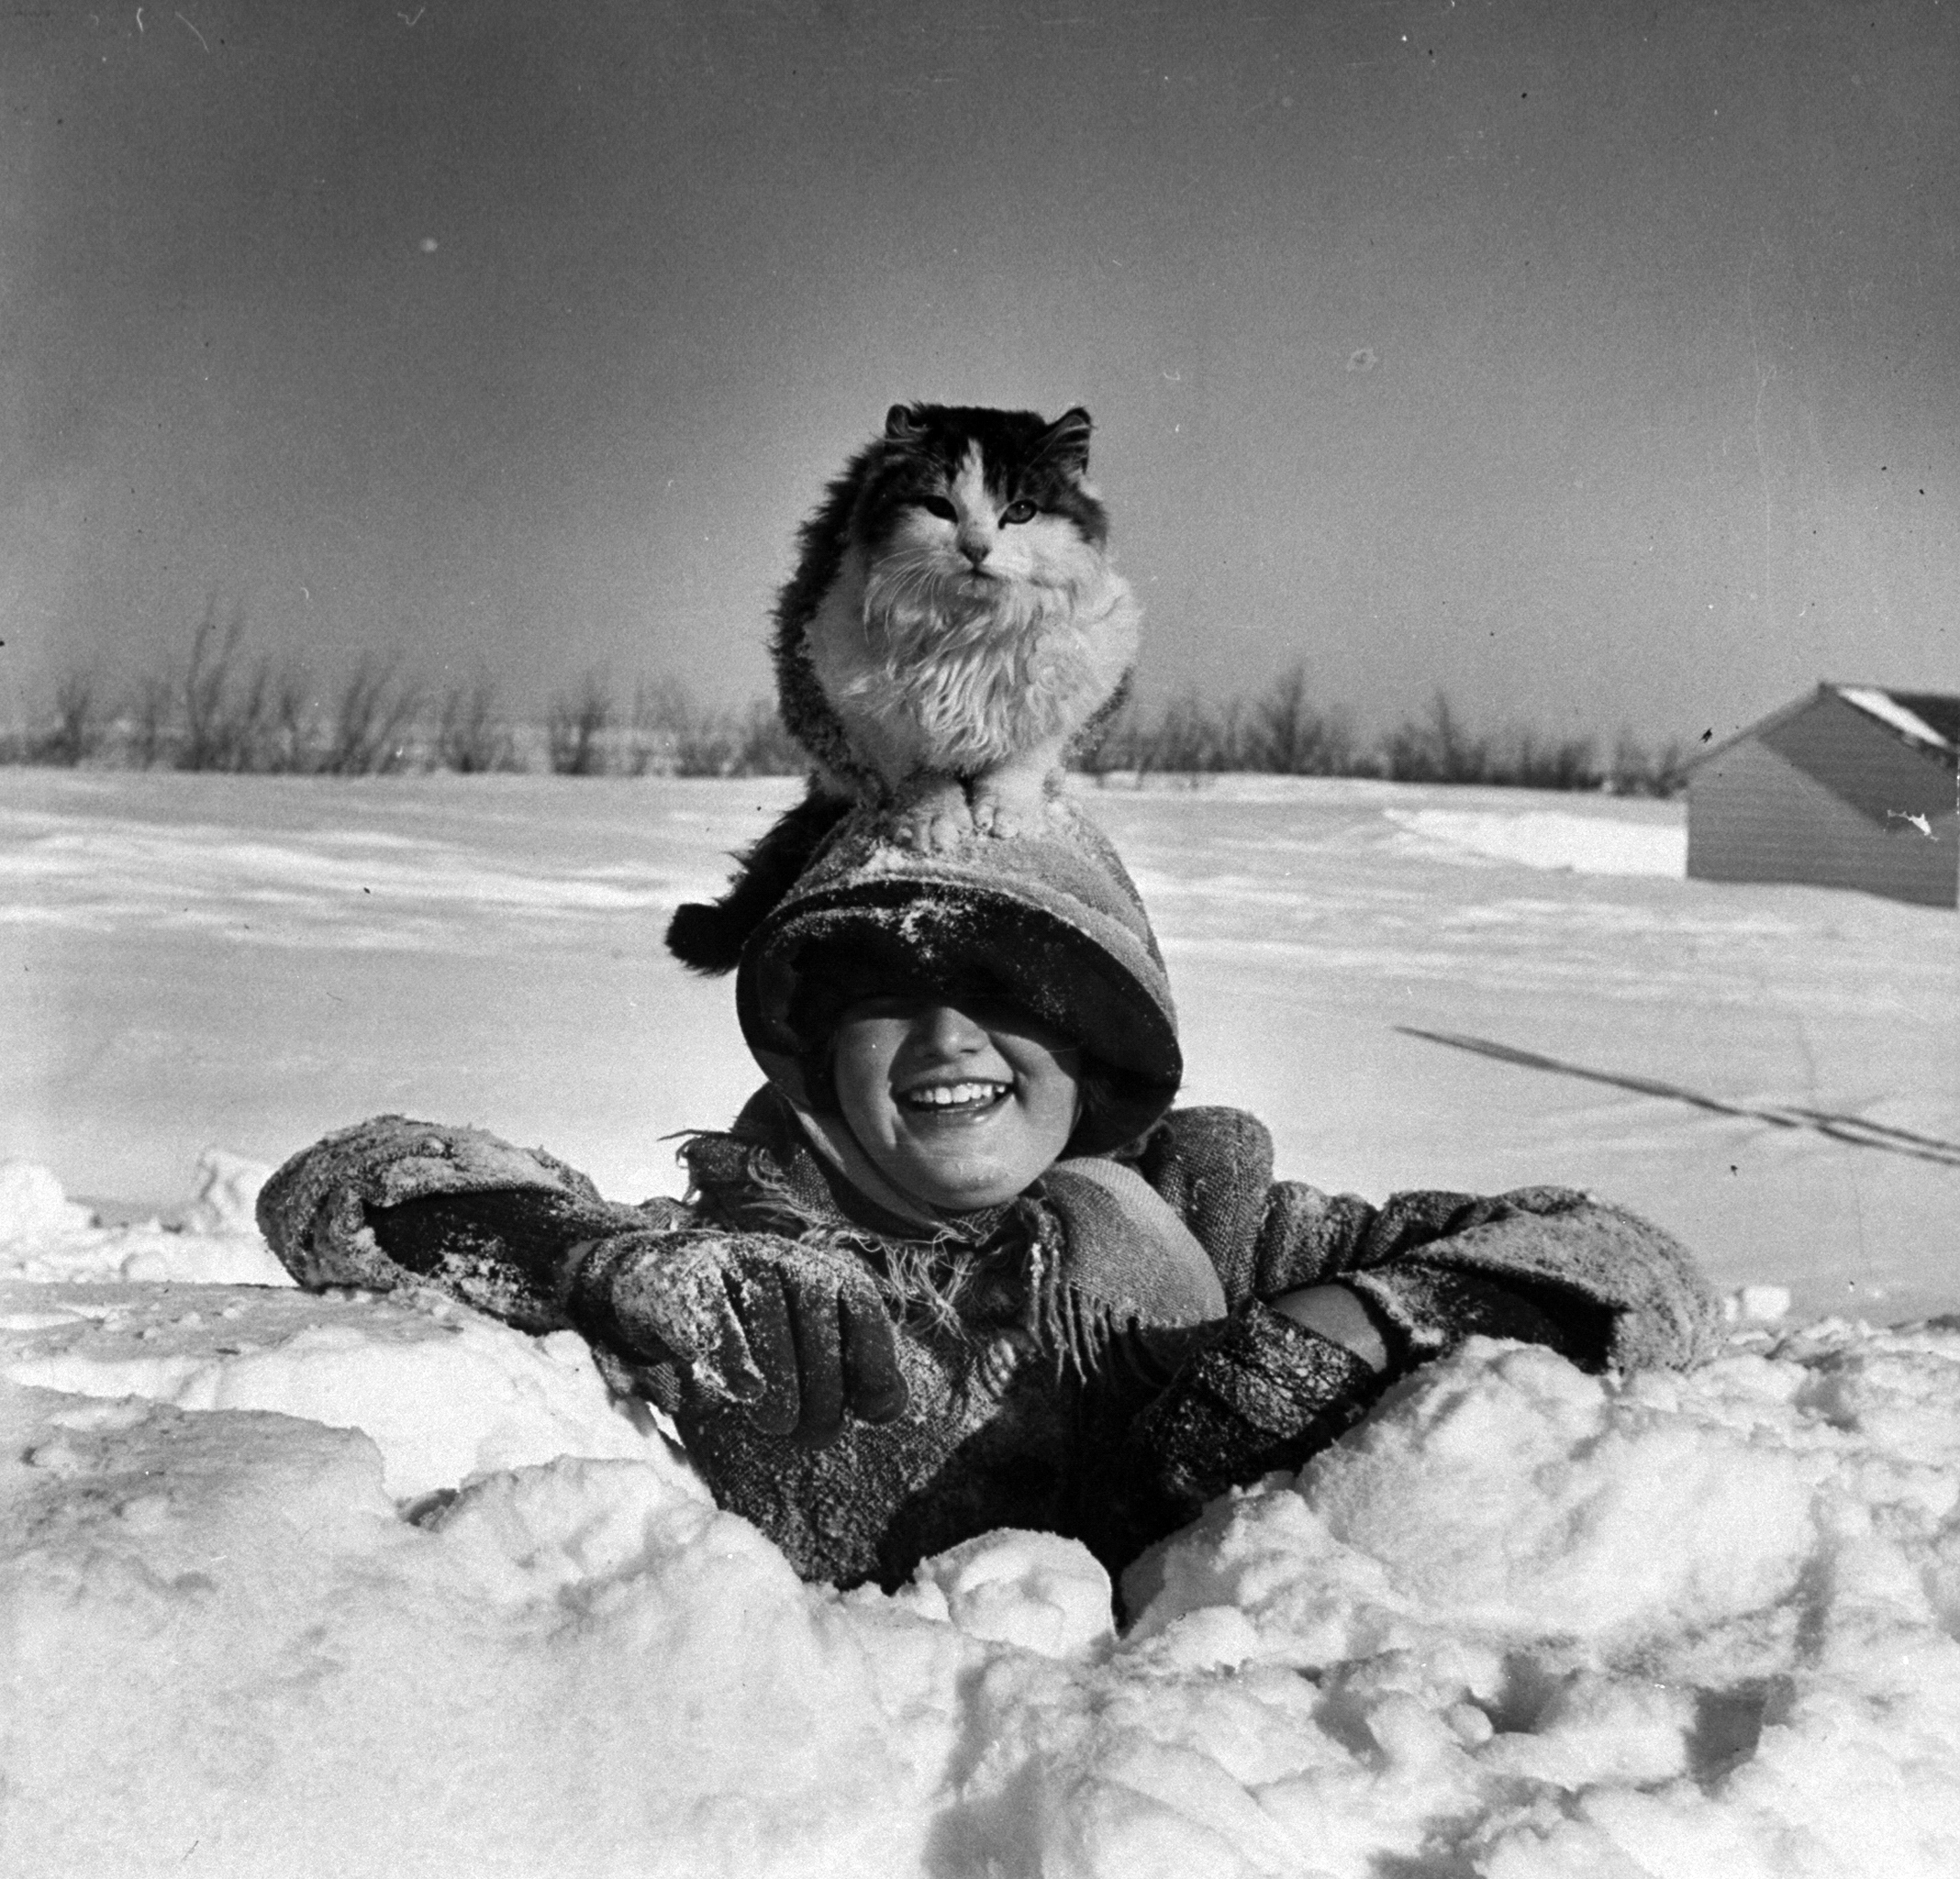 Sharon Adams, 10, playing in a snow drift as her cat maintains its comfortable perch atop her head, 1952.